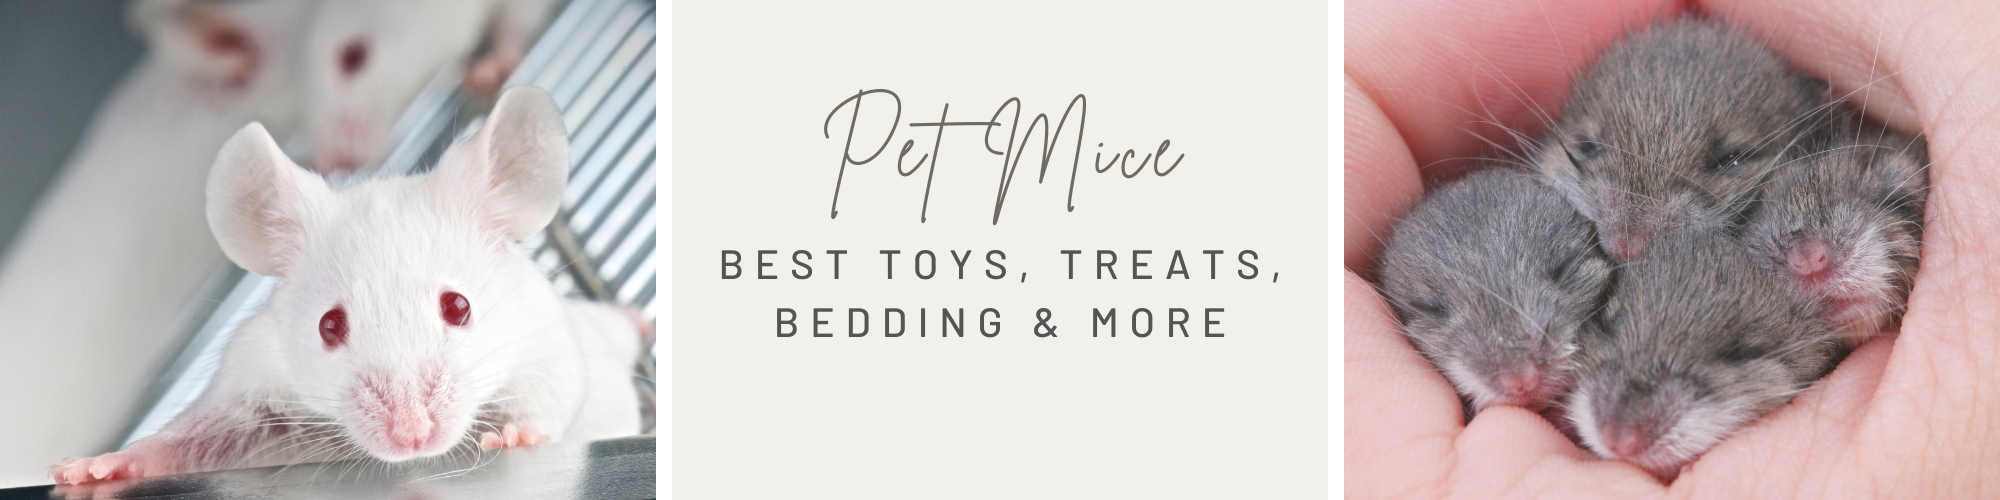 all my favorite things pet mice toys food bedding treats